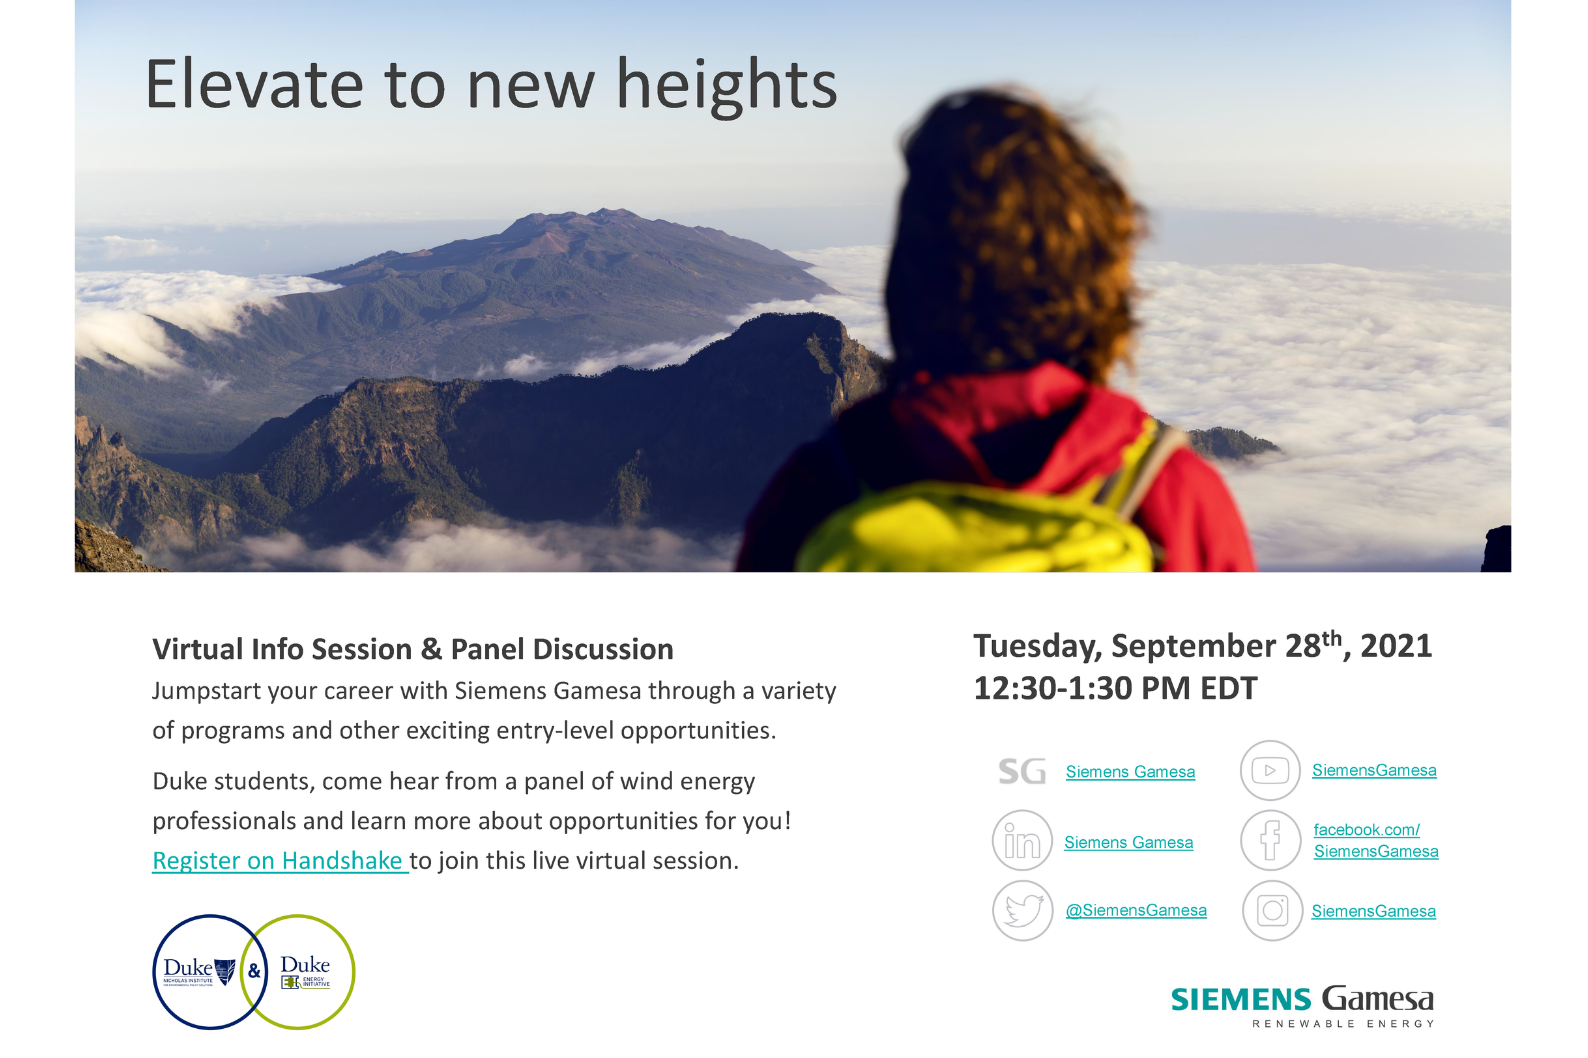 Siemens Gamesa Virtual Info Session & Panel Discussion - Jumpstart your career with Siemens Gamesa through a variety of programs and other exciting entry-level opportunities. Tuesday September 28, 12:30-1:30 p.m. EDT